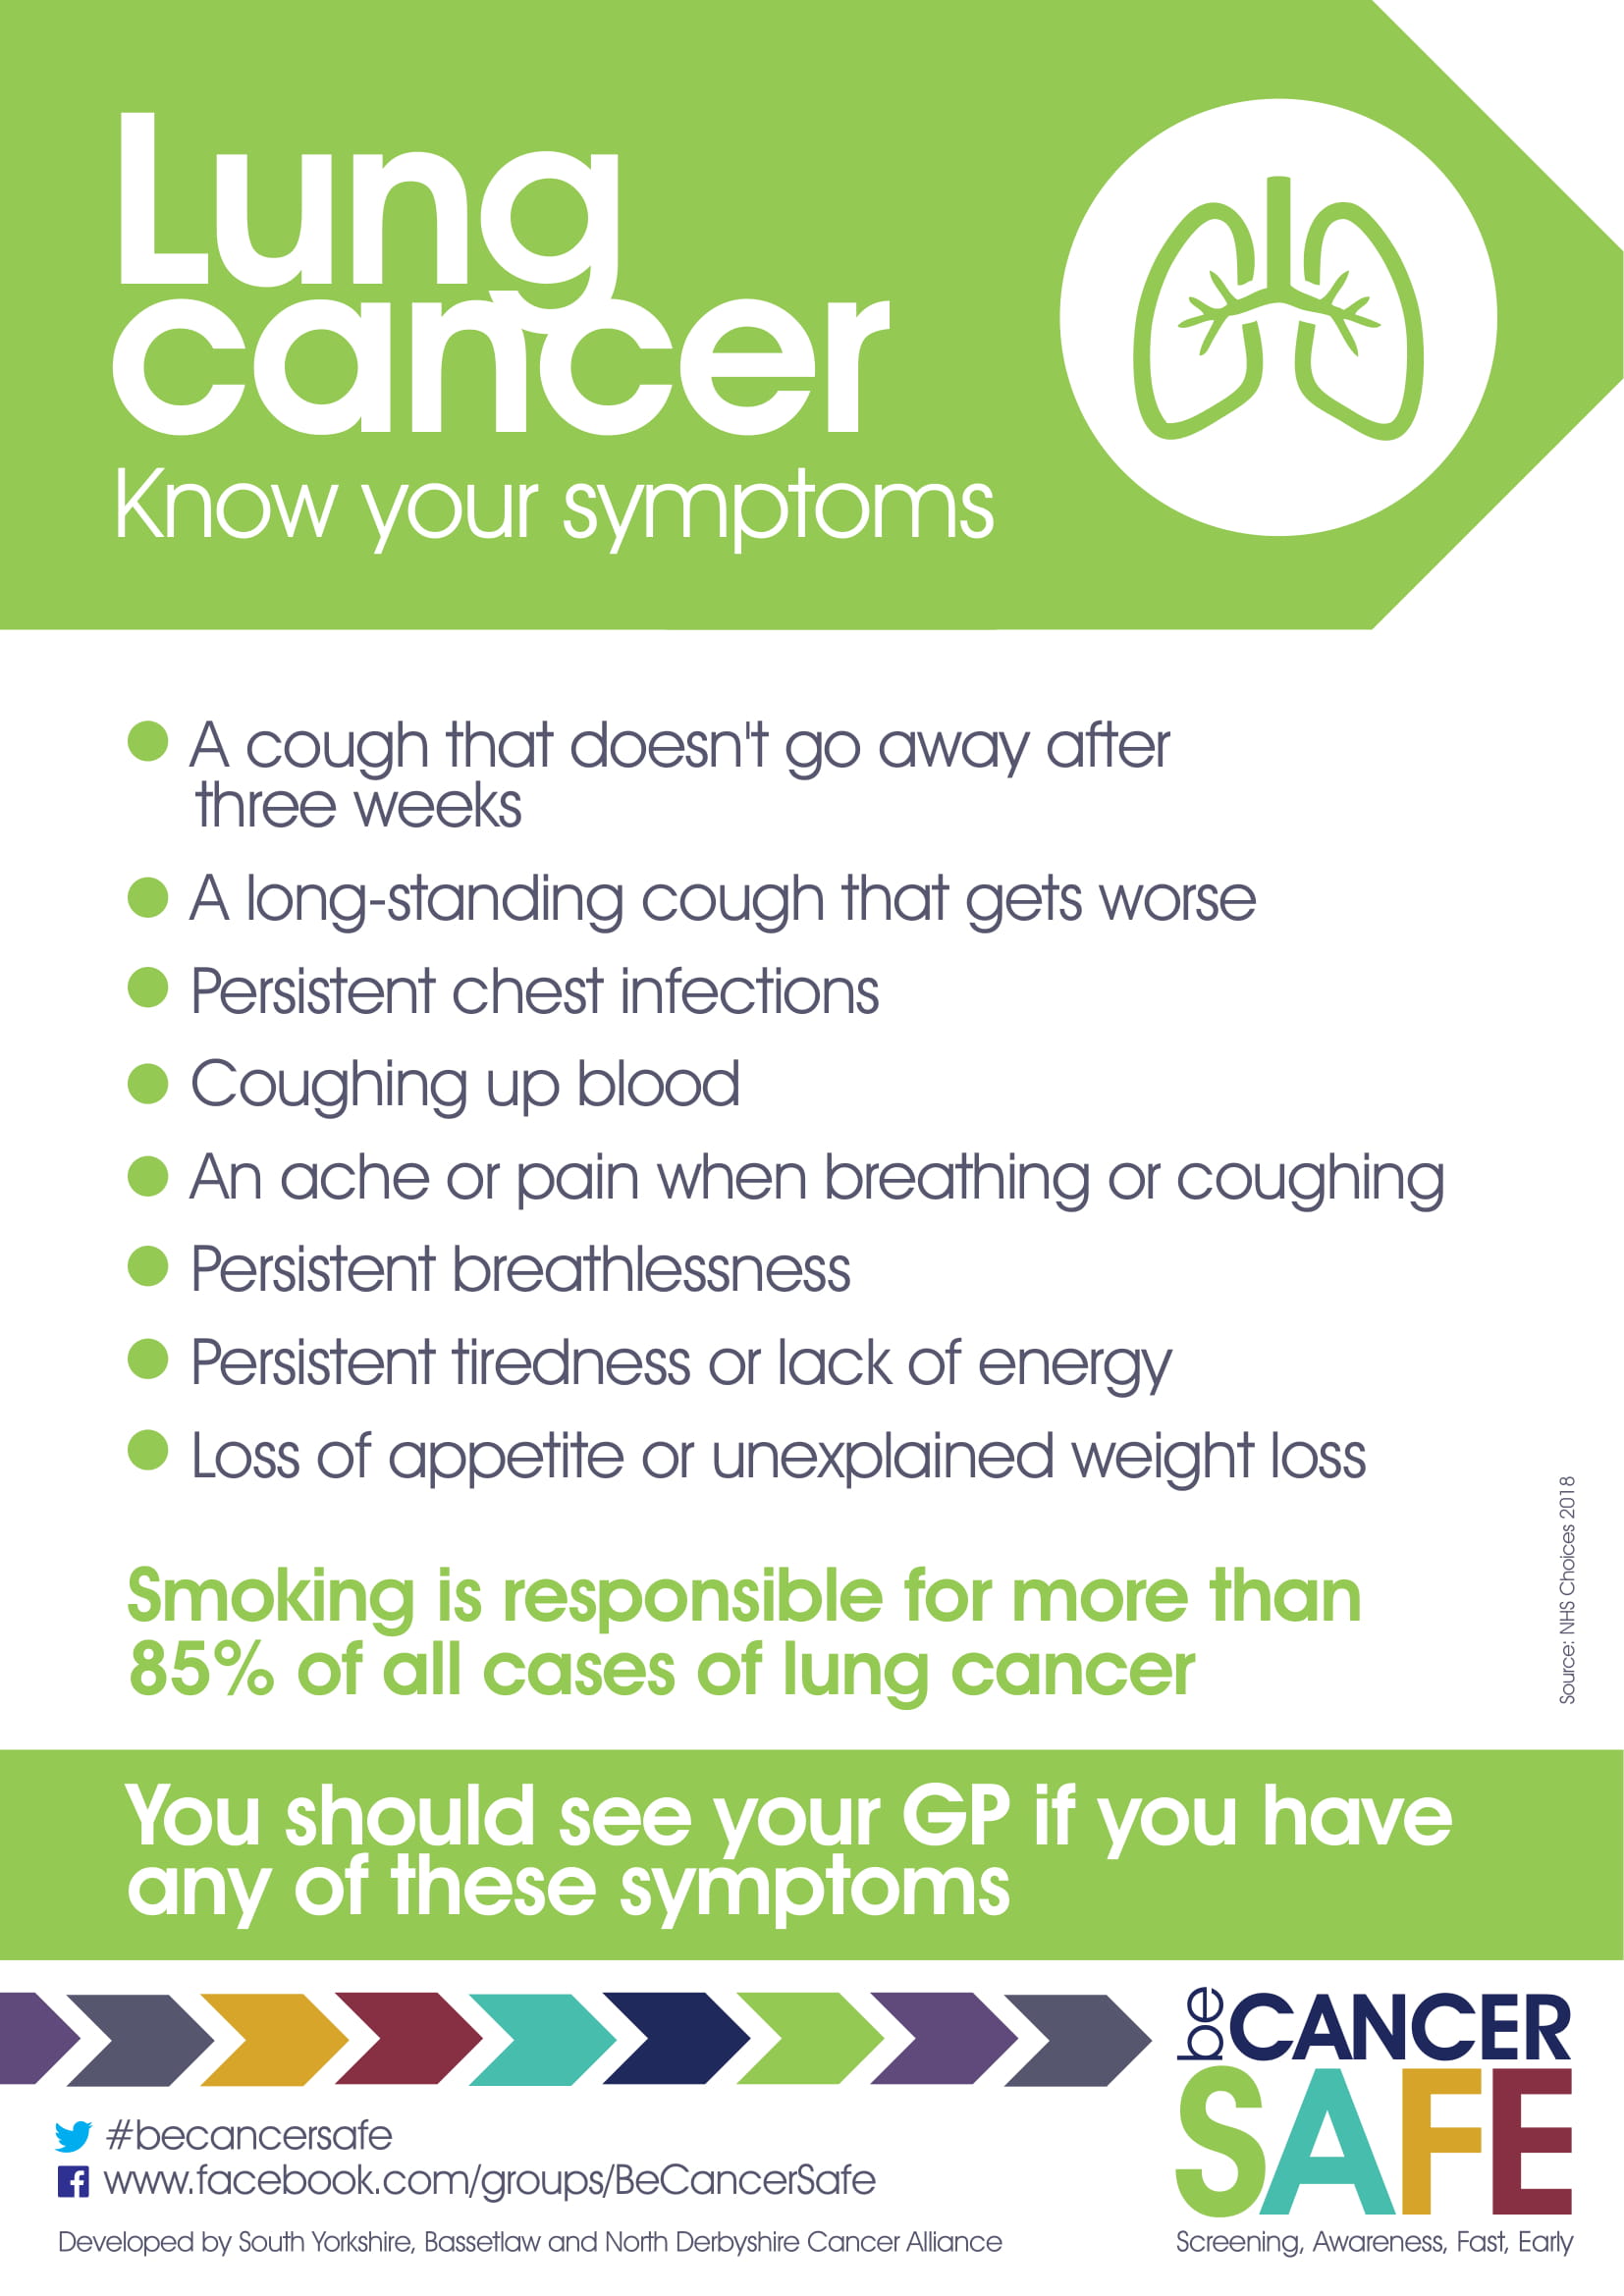 lung_cancer_poster_copy-1.jpg